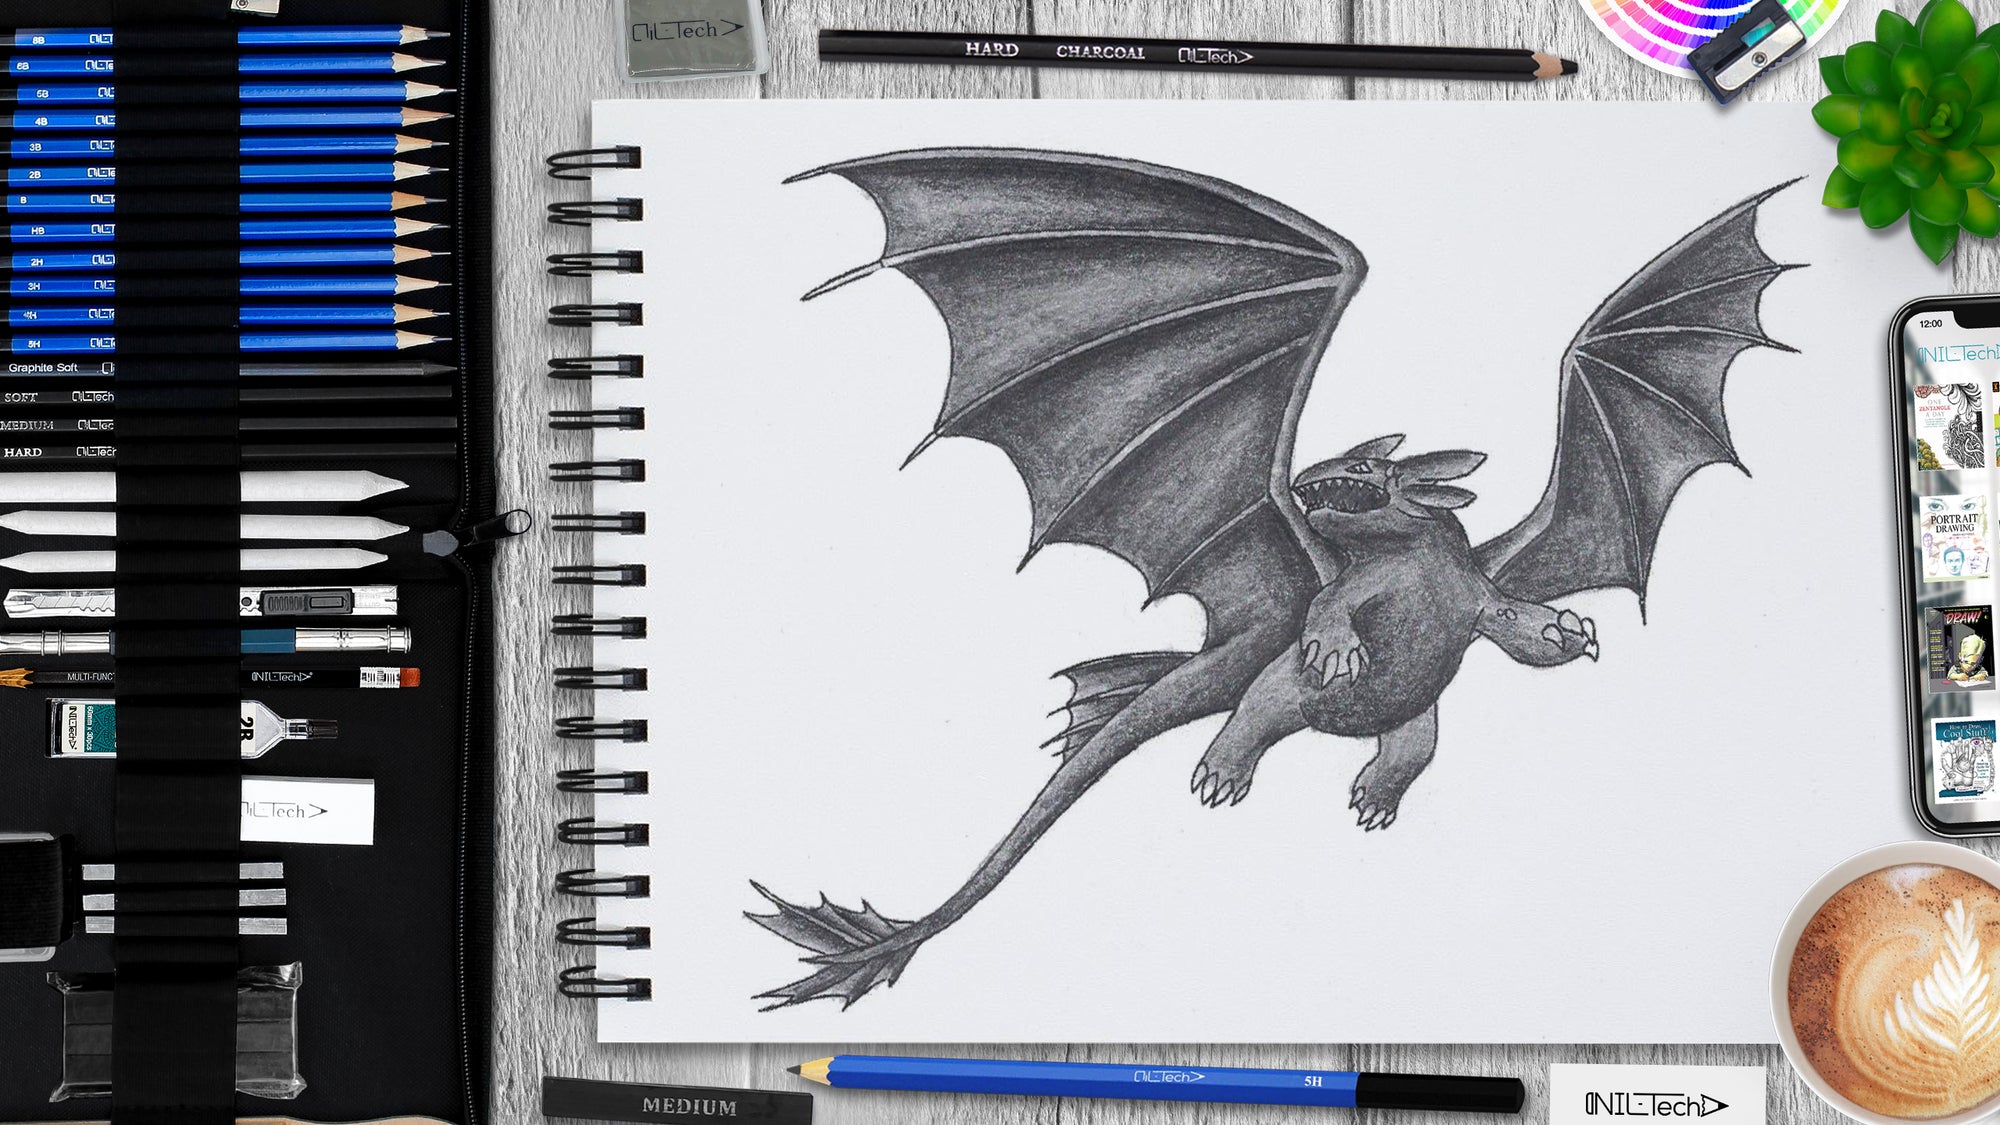 Quirky Cartoon Drawings  Toothless from How To Train Your Dragon  toothless howtotrainyourdragon cartoon character cartooncharacter  drawing game art illustration drawing draw picture artist sketch  sketchbook paper pen pencil artsy 